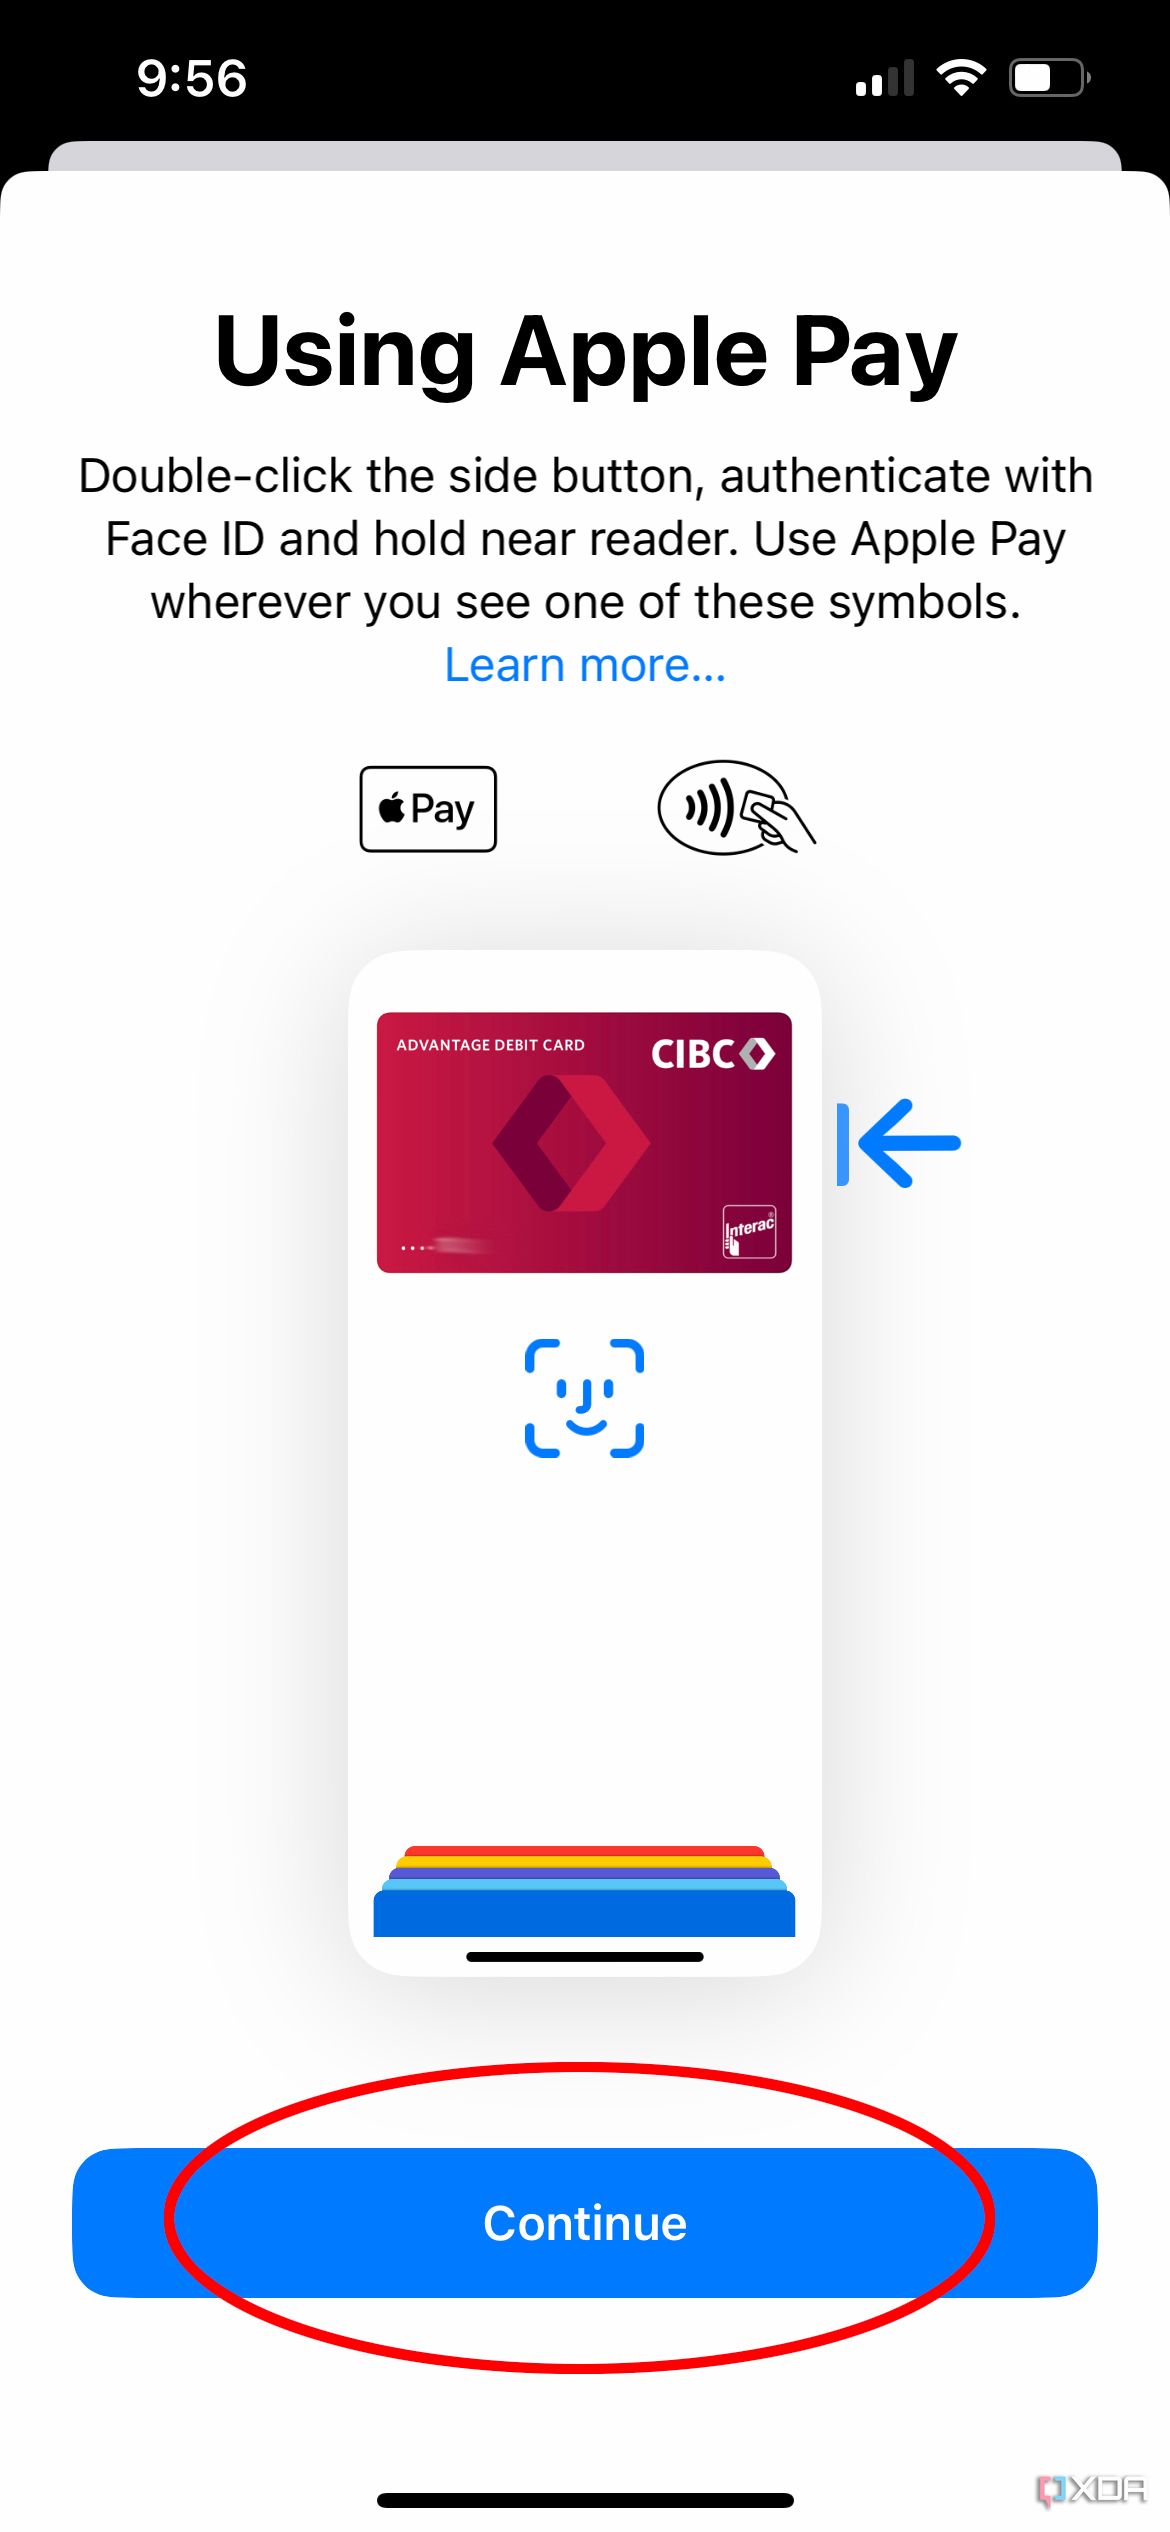 The information page on how to use Apple Pay in Apple Wallet.